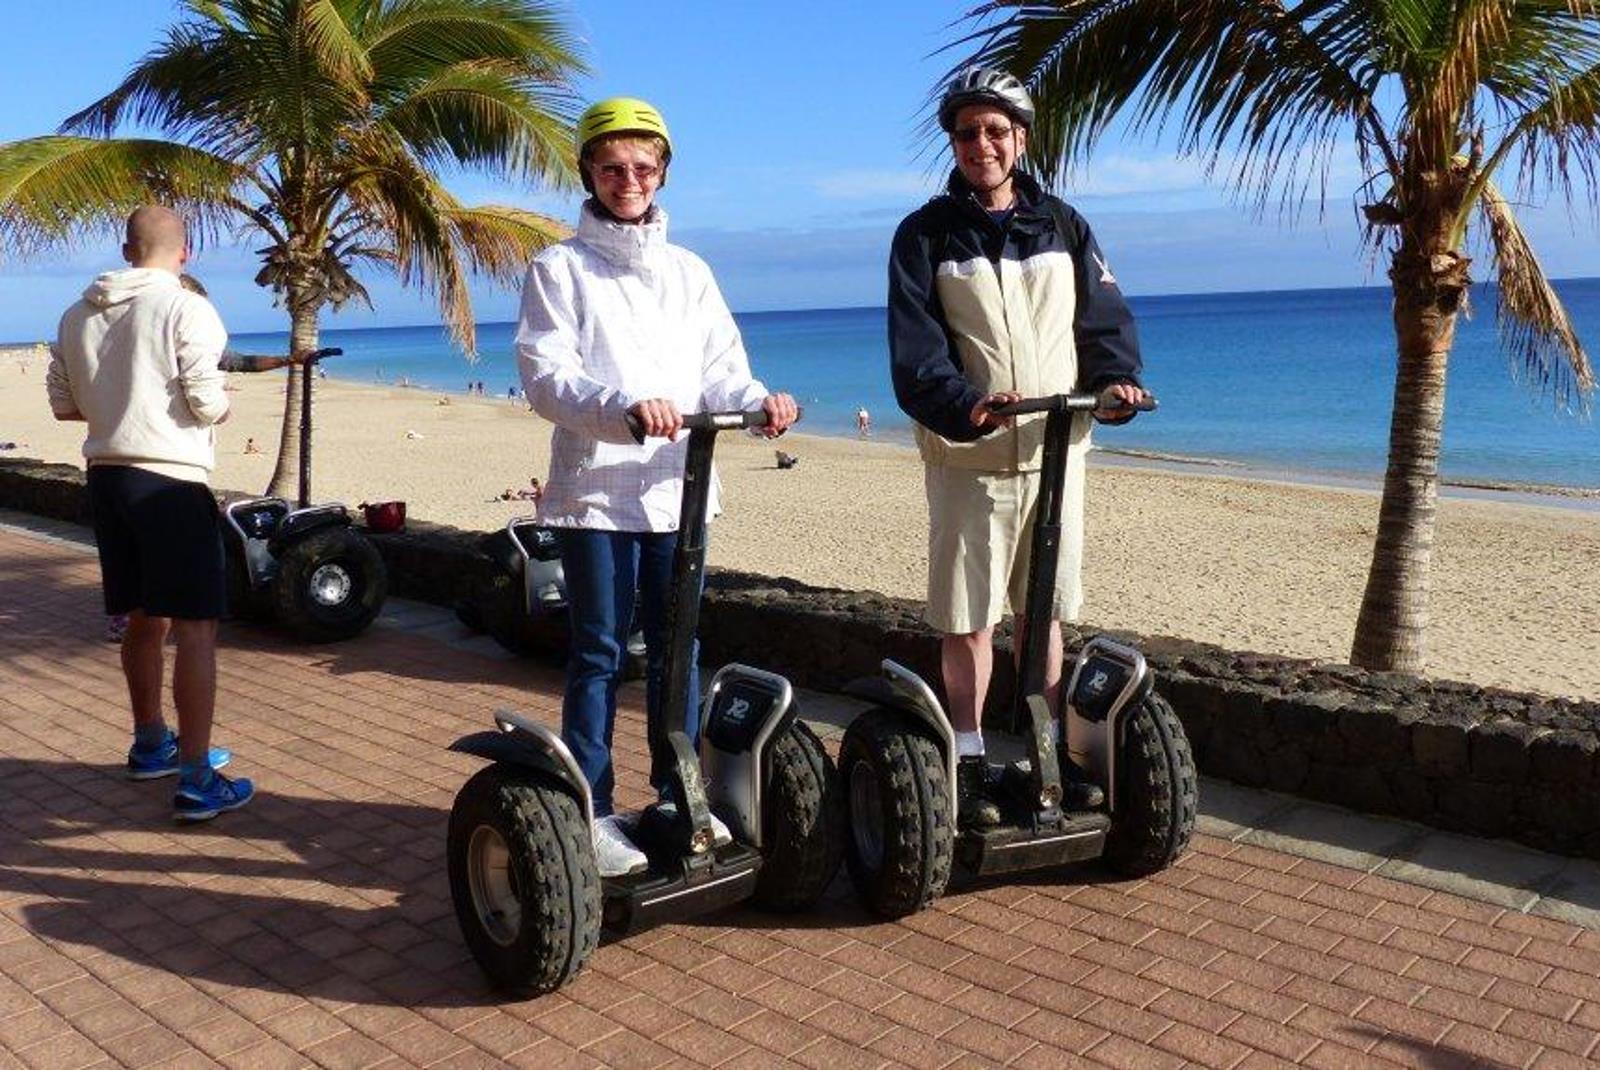 Segway Tour from Playa de Jandía to Morro Jable